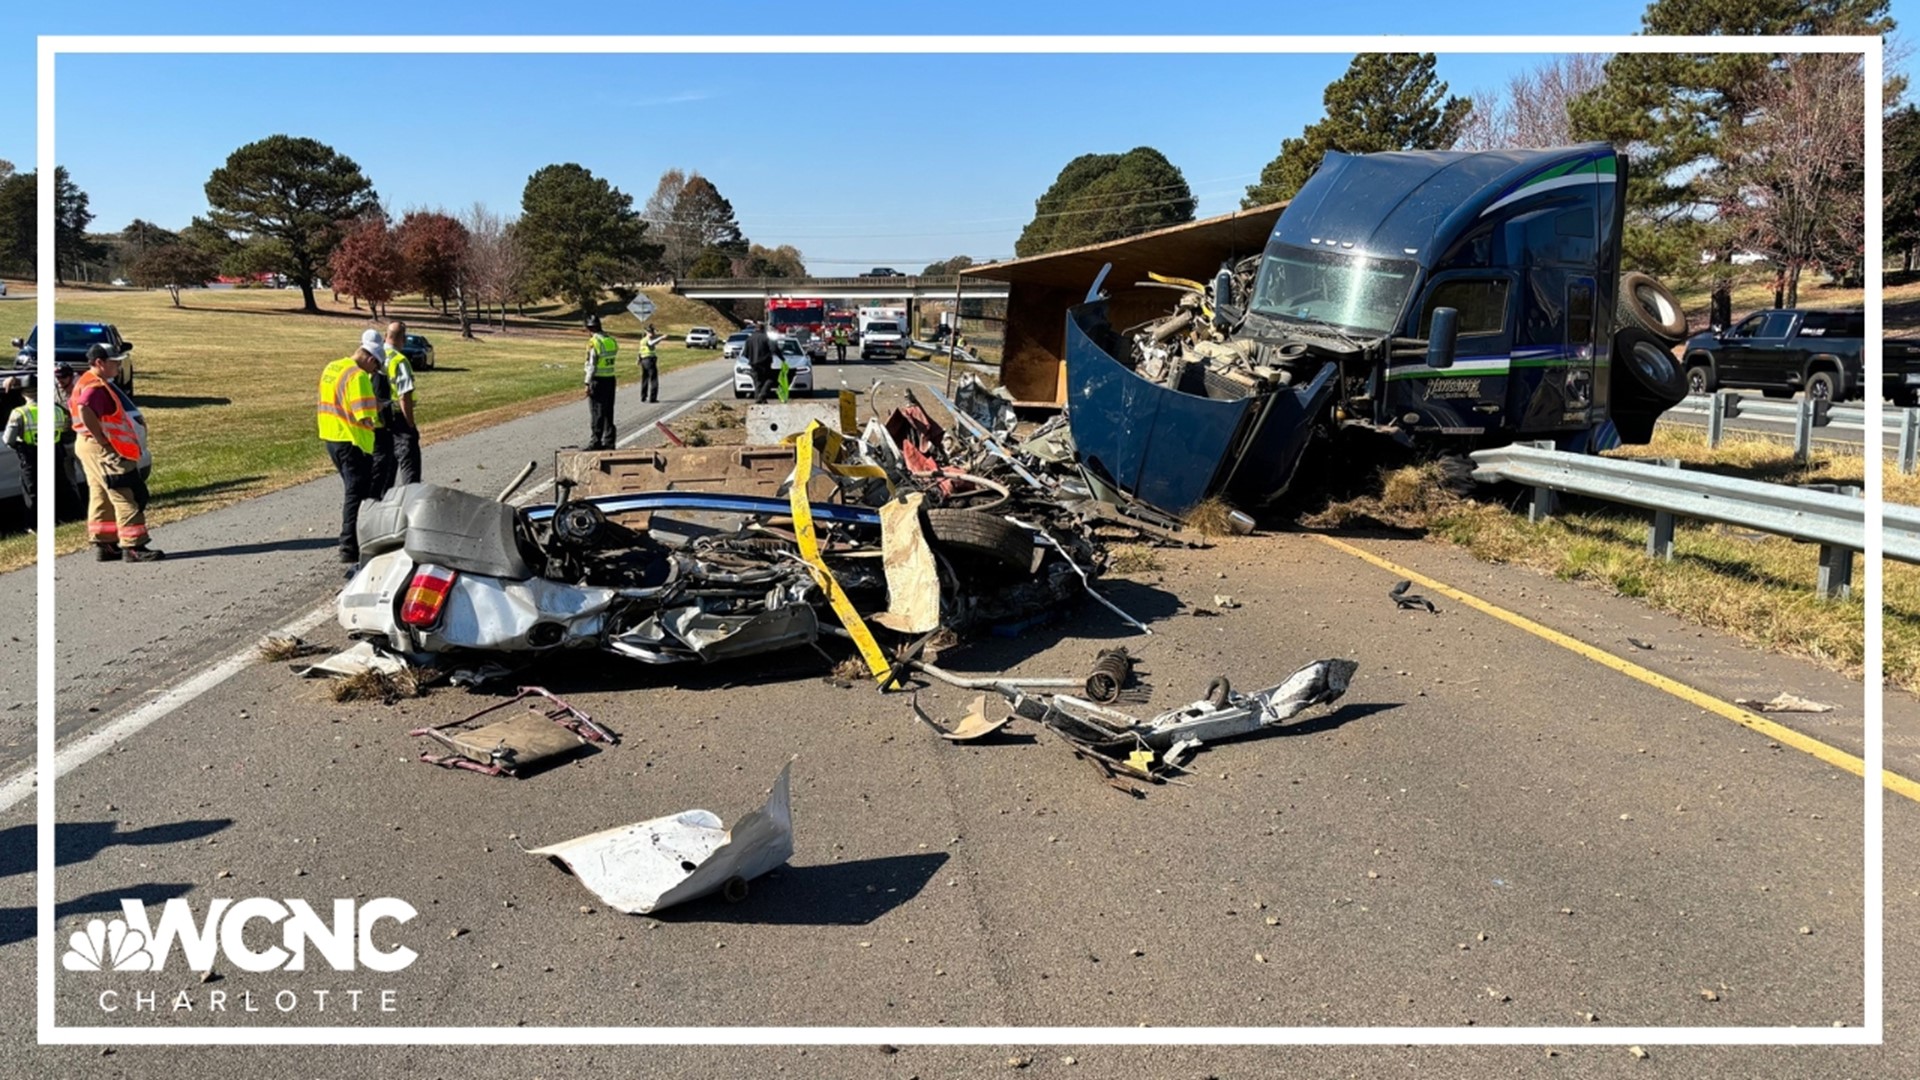 The eastbound lanes of Interstate 40 were shut down near Rock Barn Road in Conover Monday afternoon due to an overturned tractor-trailer, officials said.